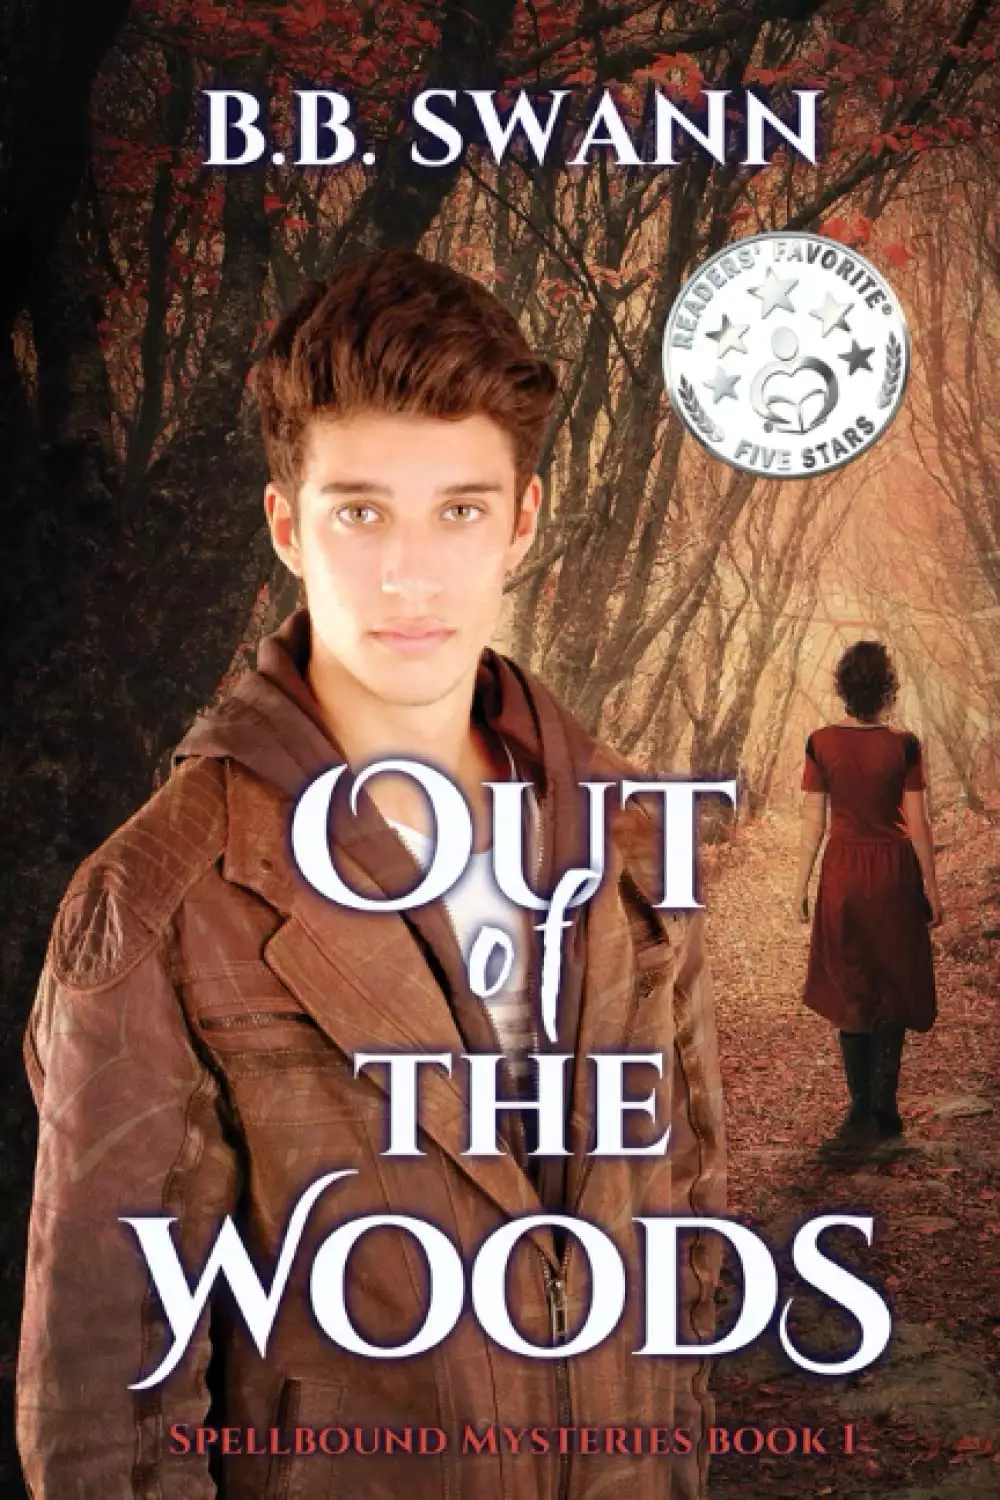 Out of the Woods: Spellbound Mysteries Book 1